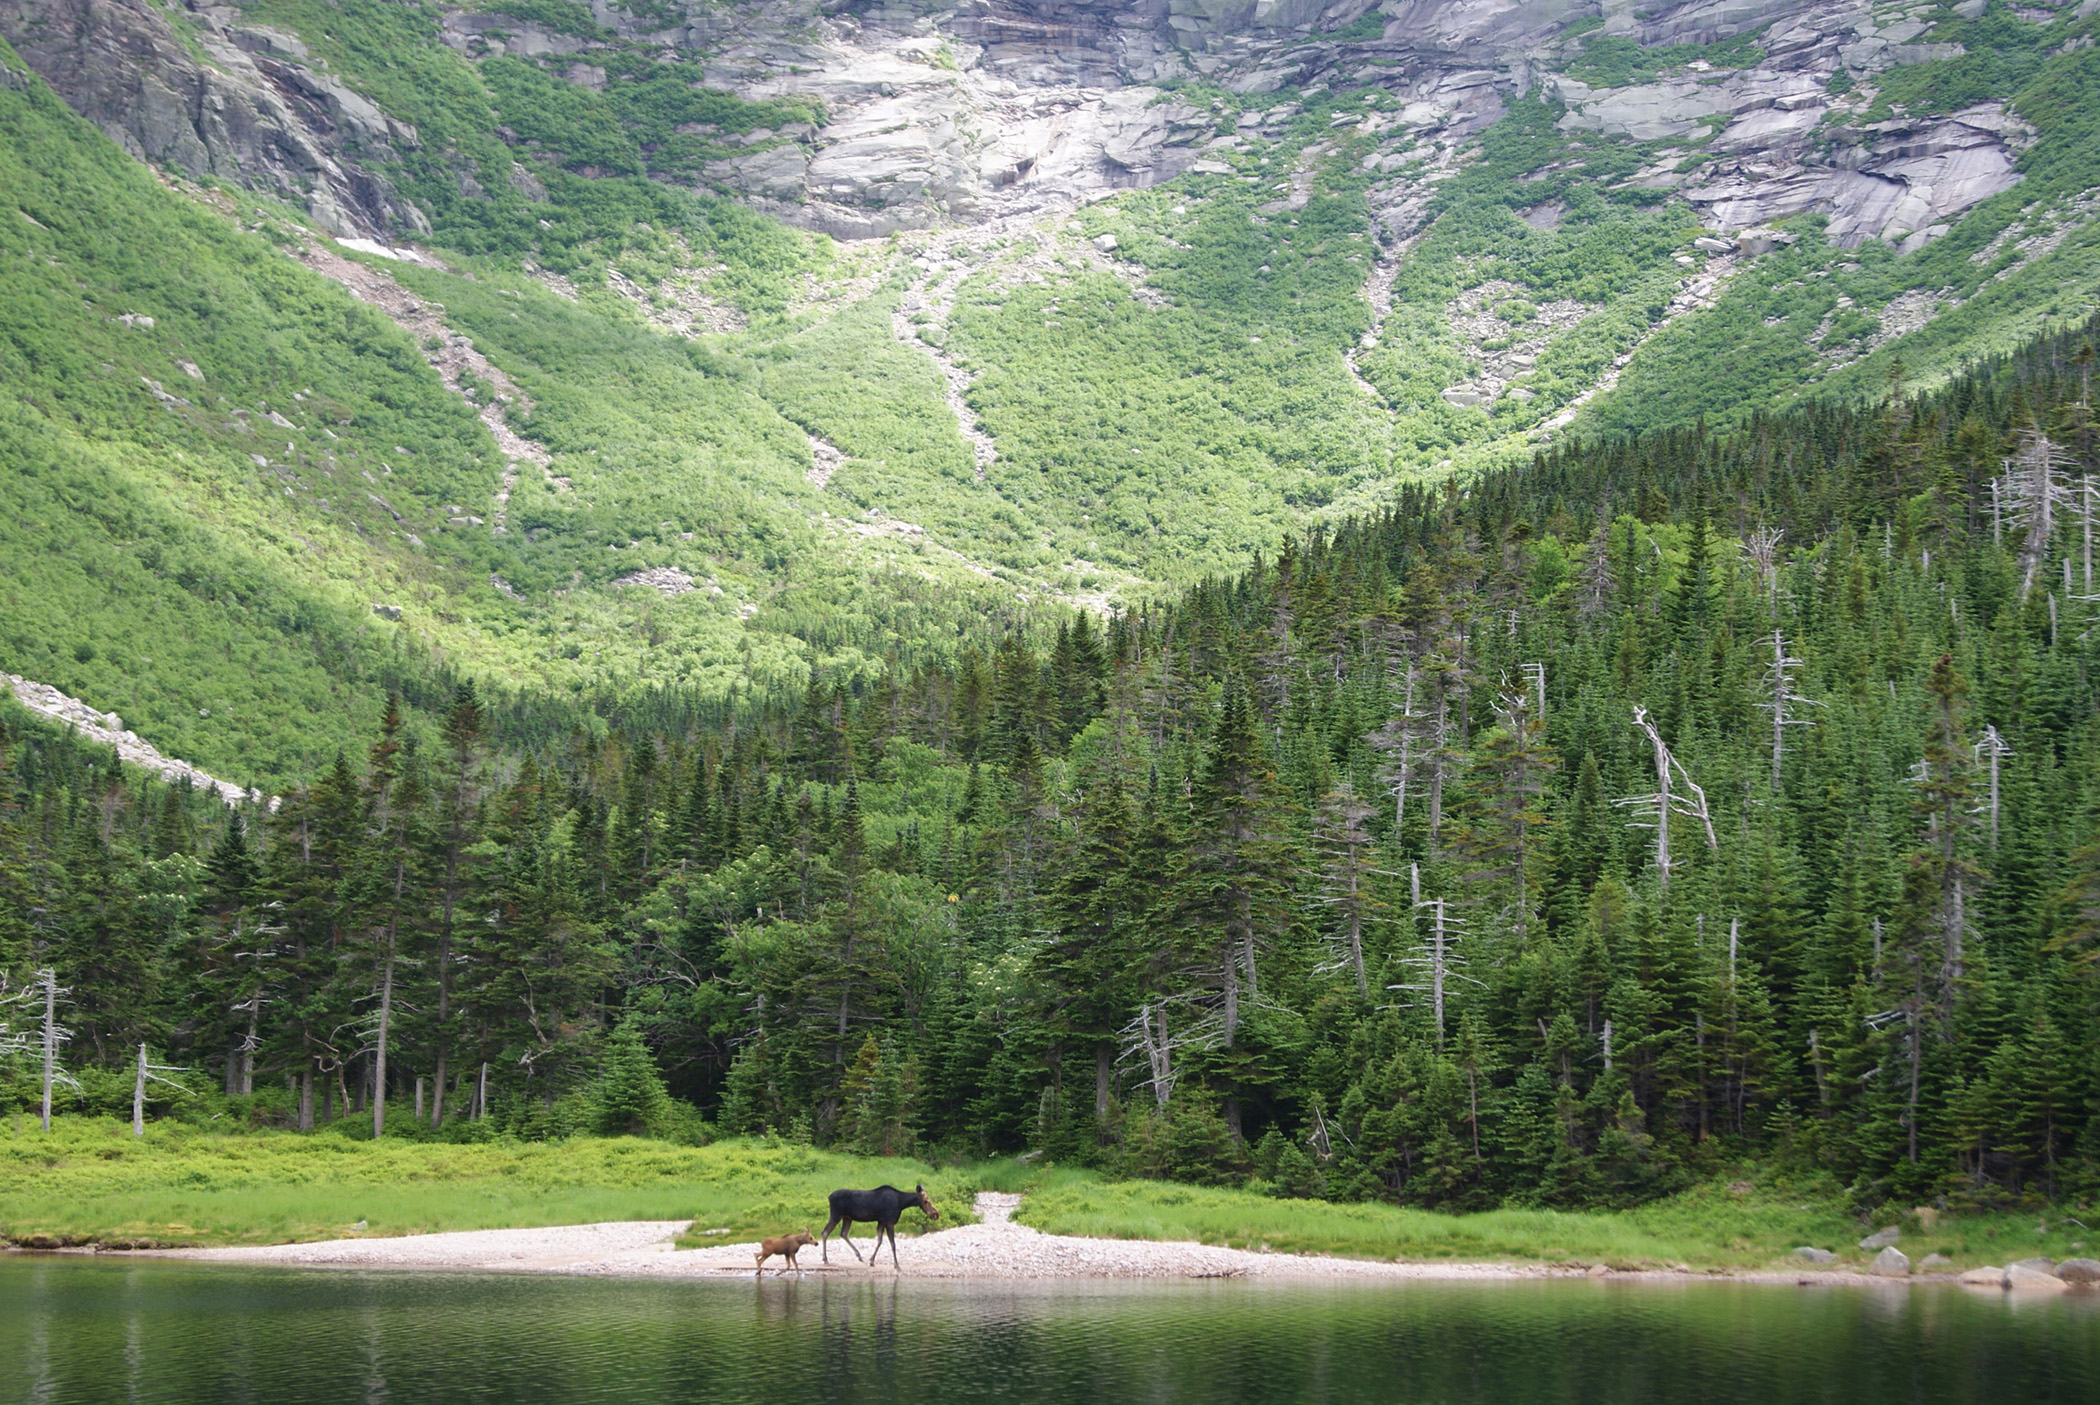 most-beautiful-places-in-maine-moose.jpg